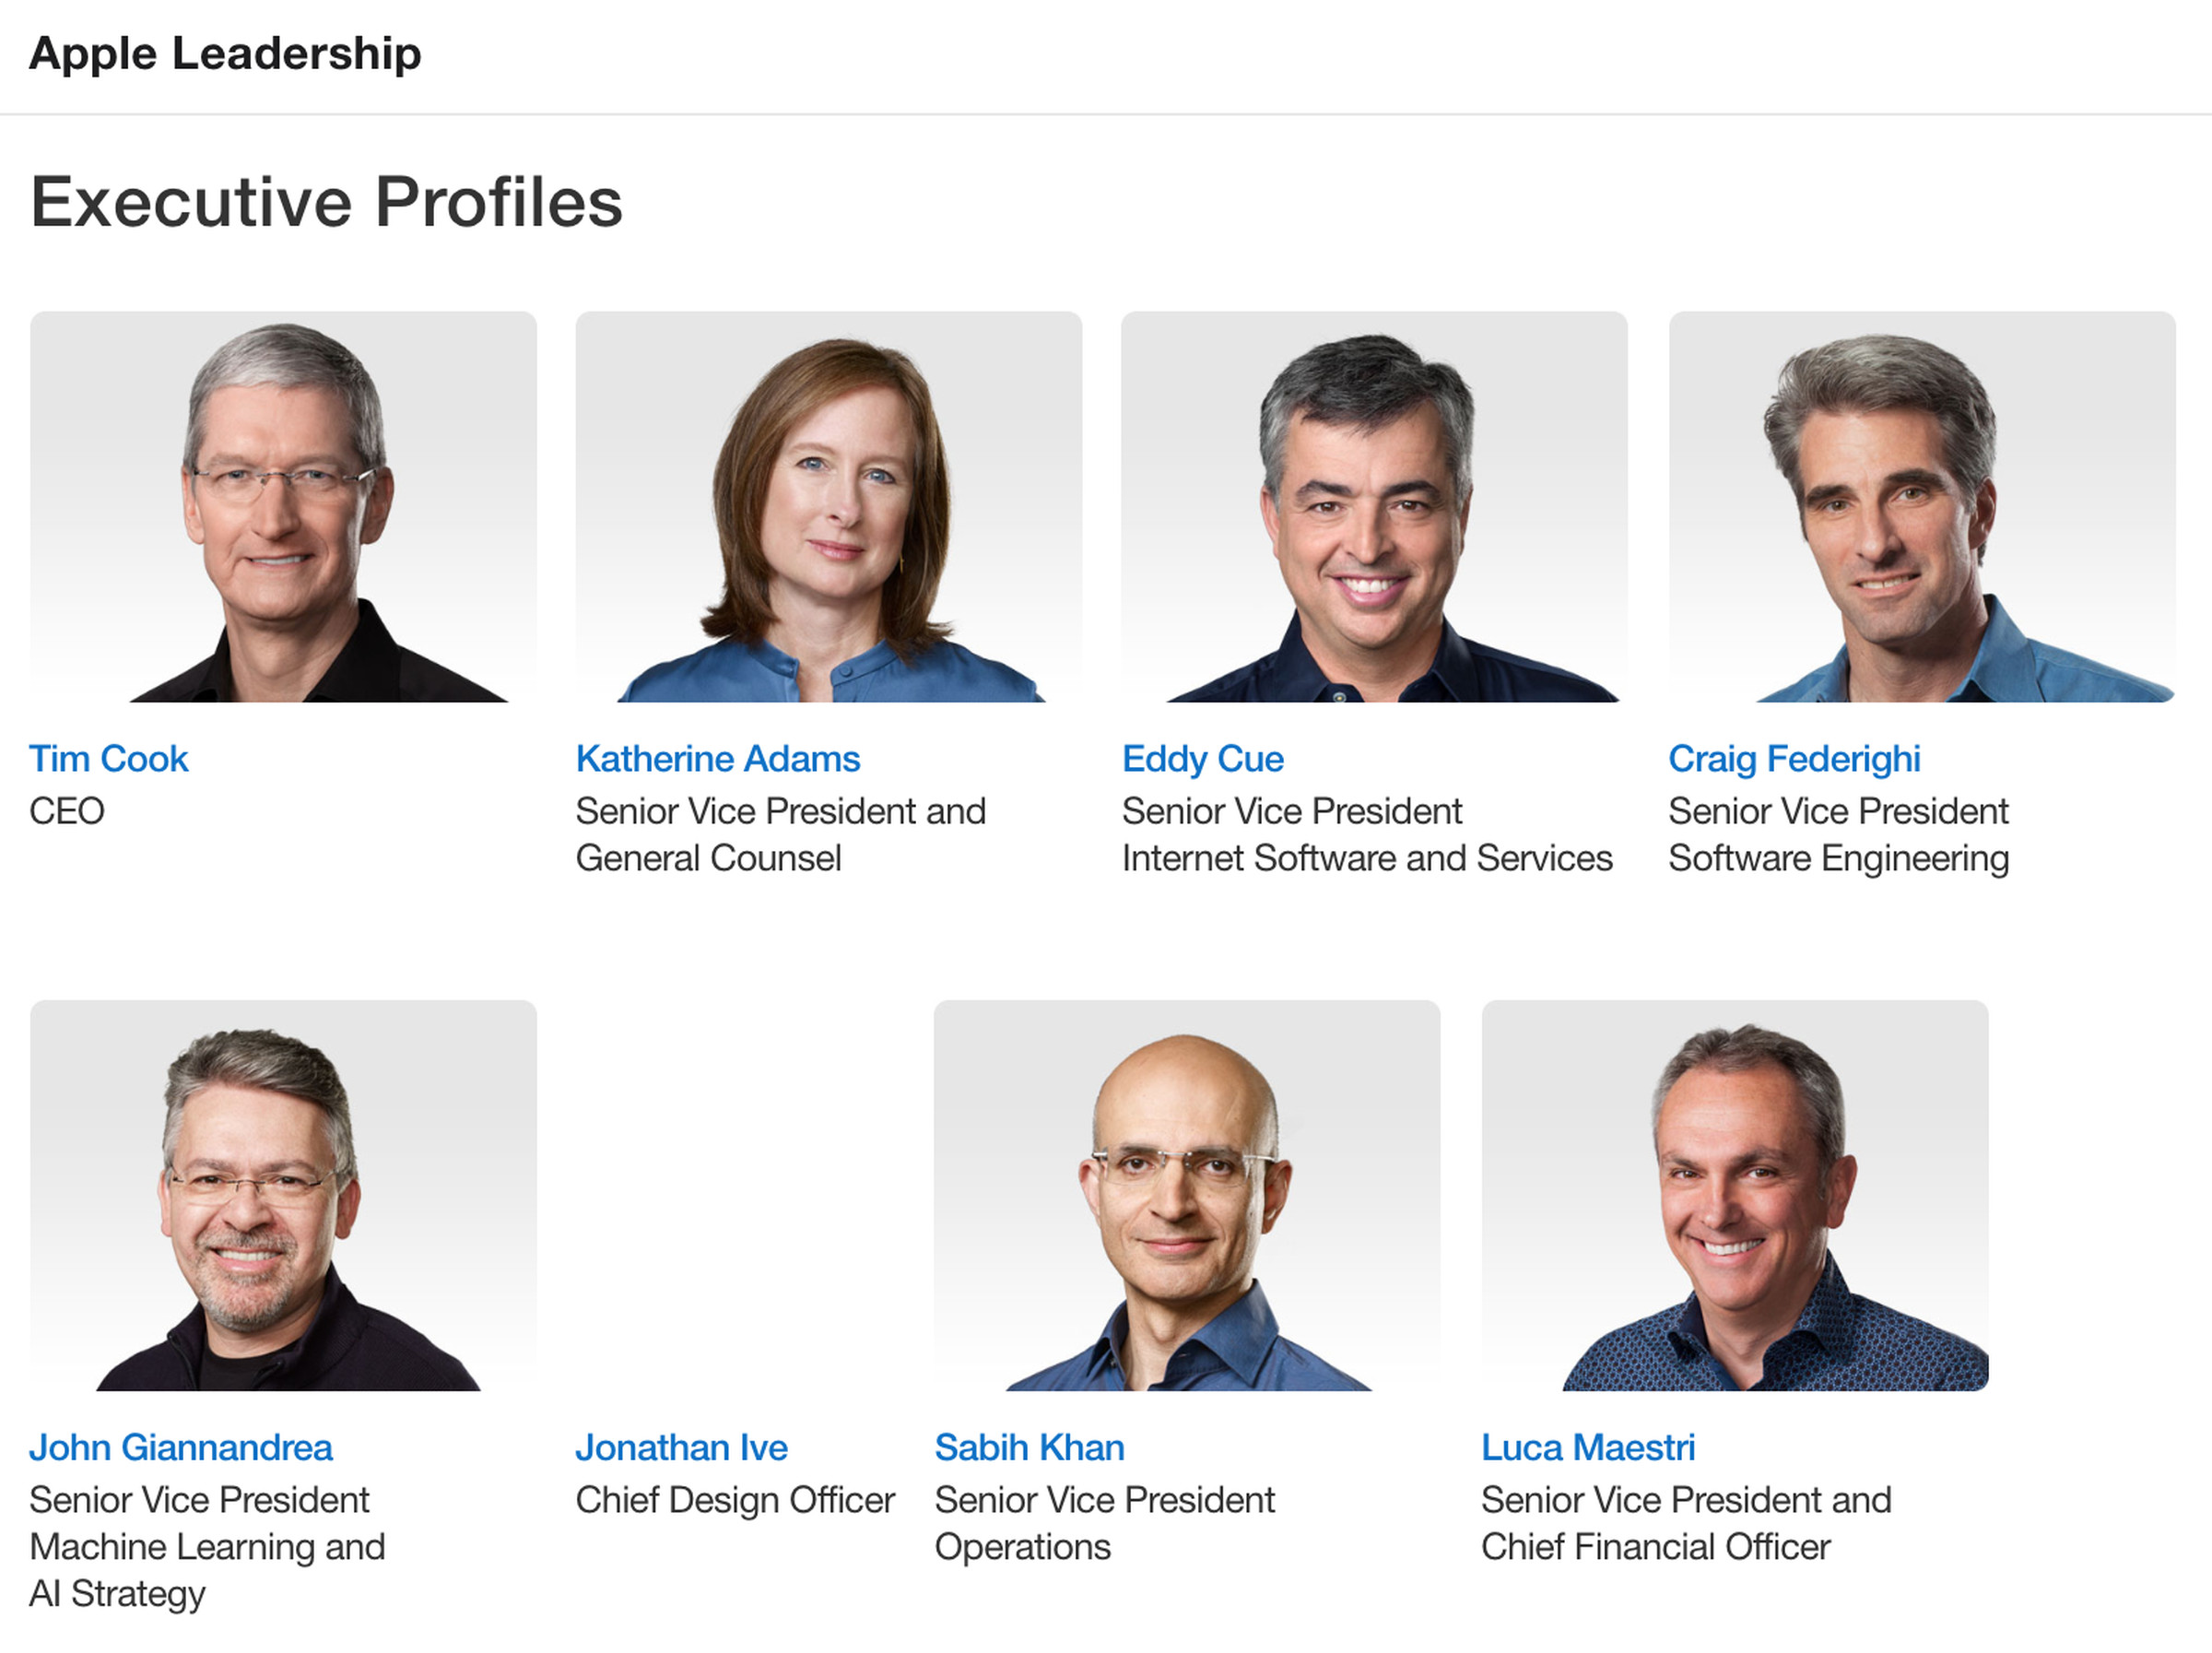 Apple’s Leadership page as of 26 nov 2019 11:12:55 GMT (via Google cache). Ive has been completely removed as of today.